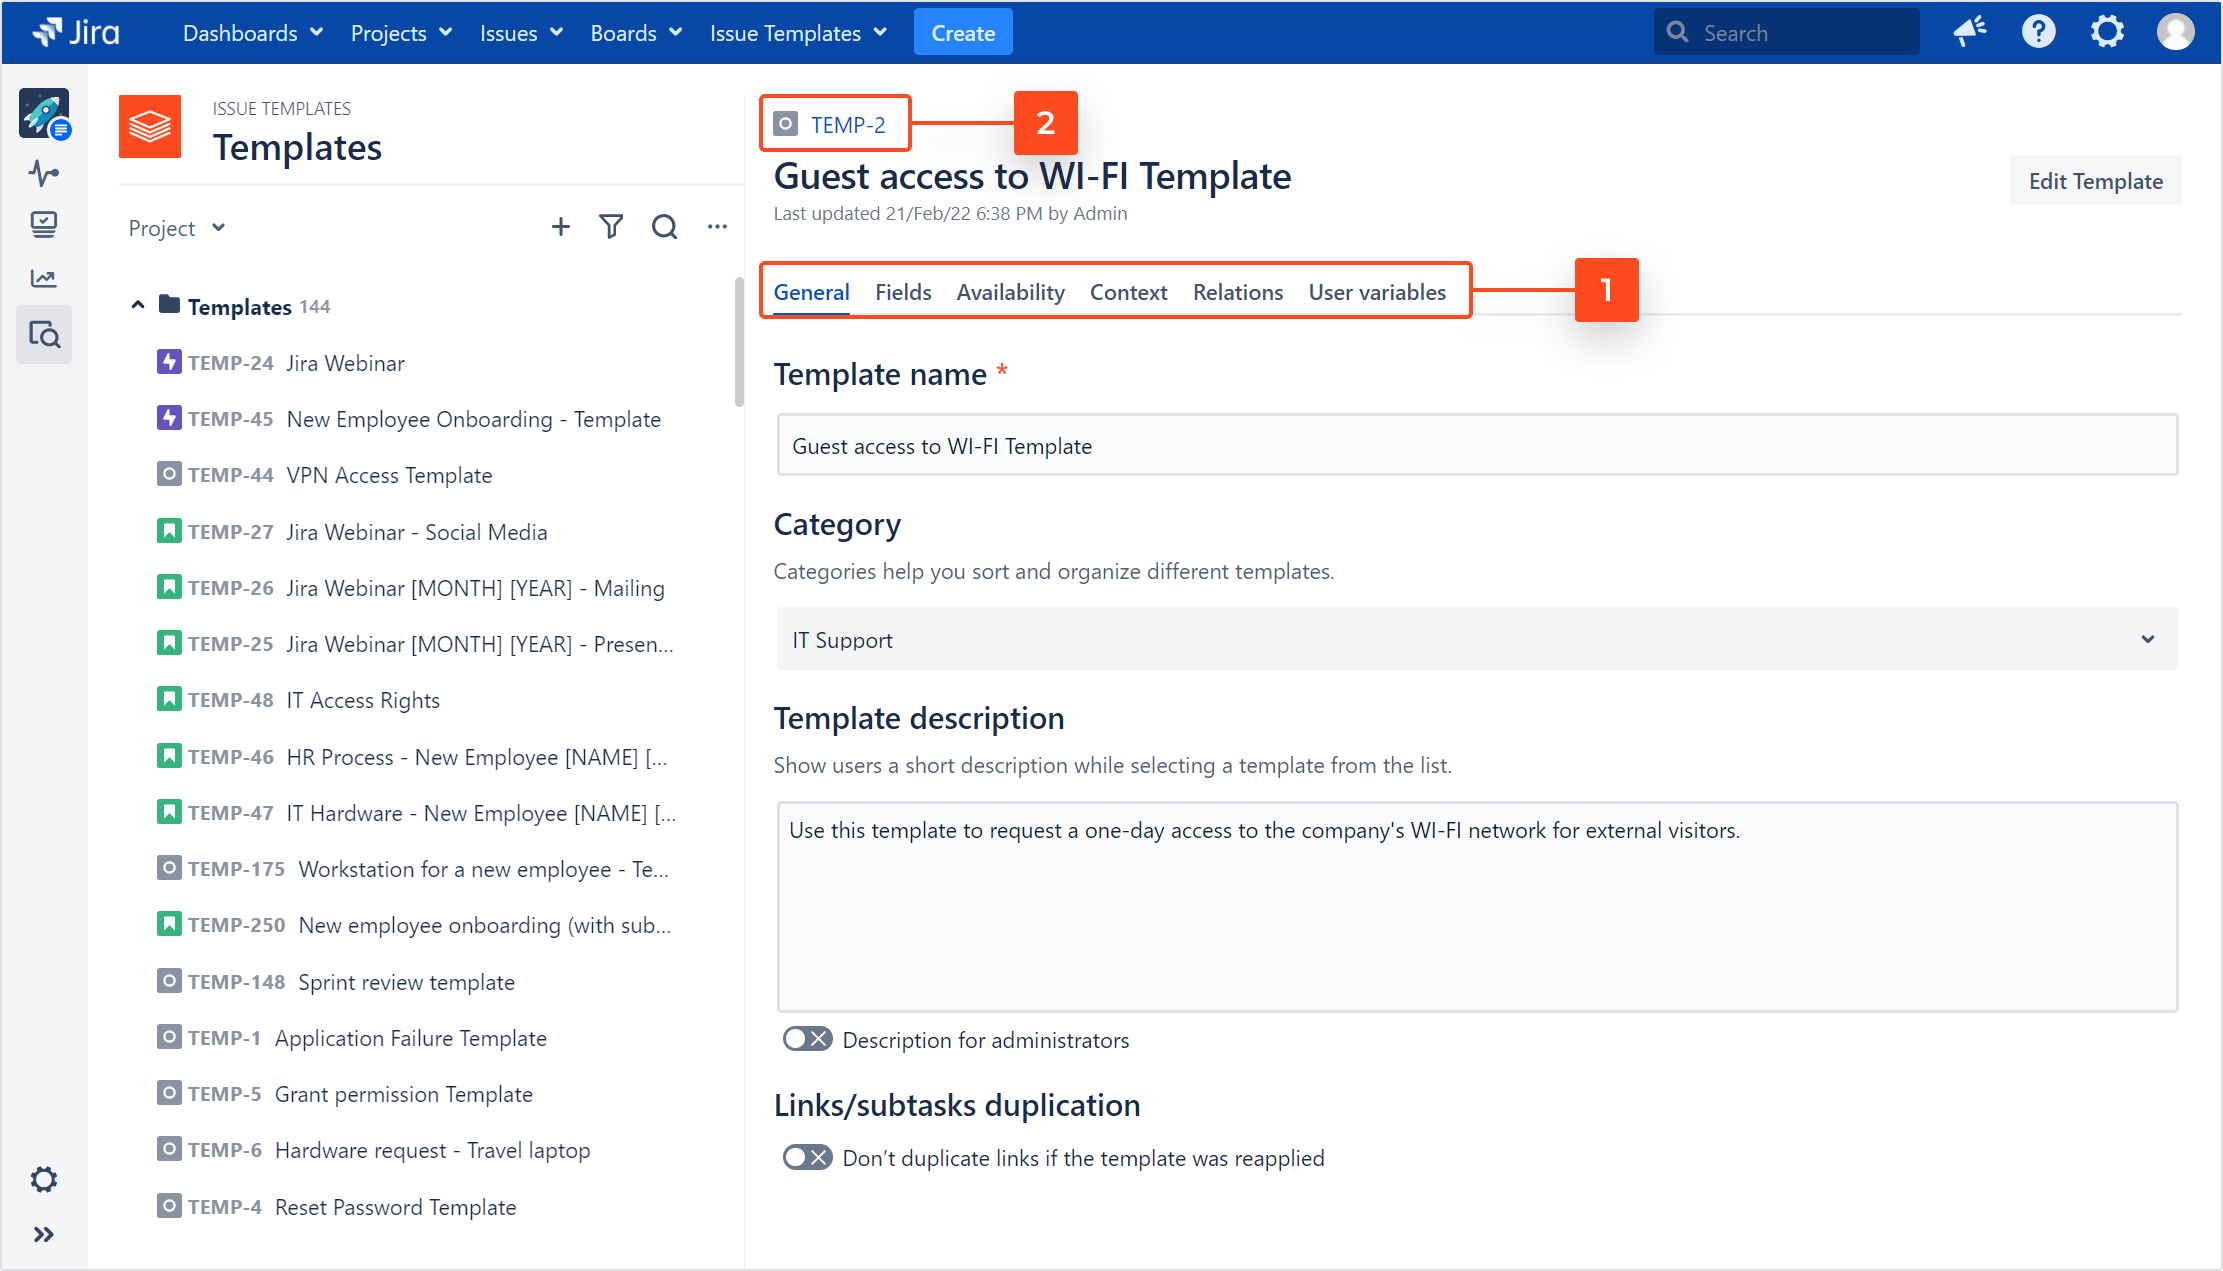 Jira Issue Templates - Issue Templates Details